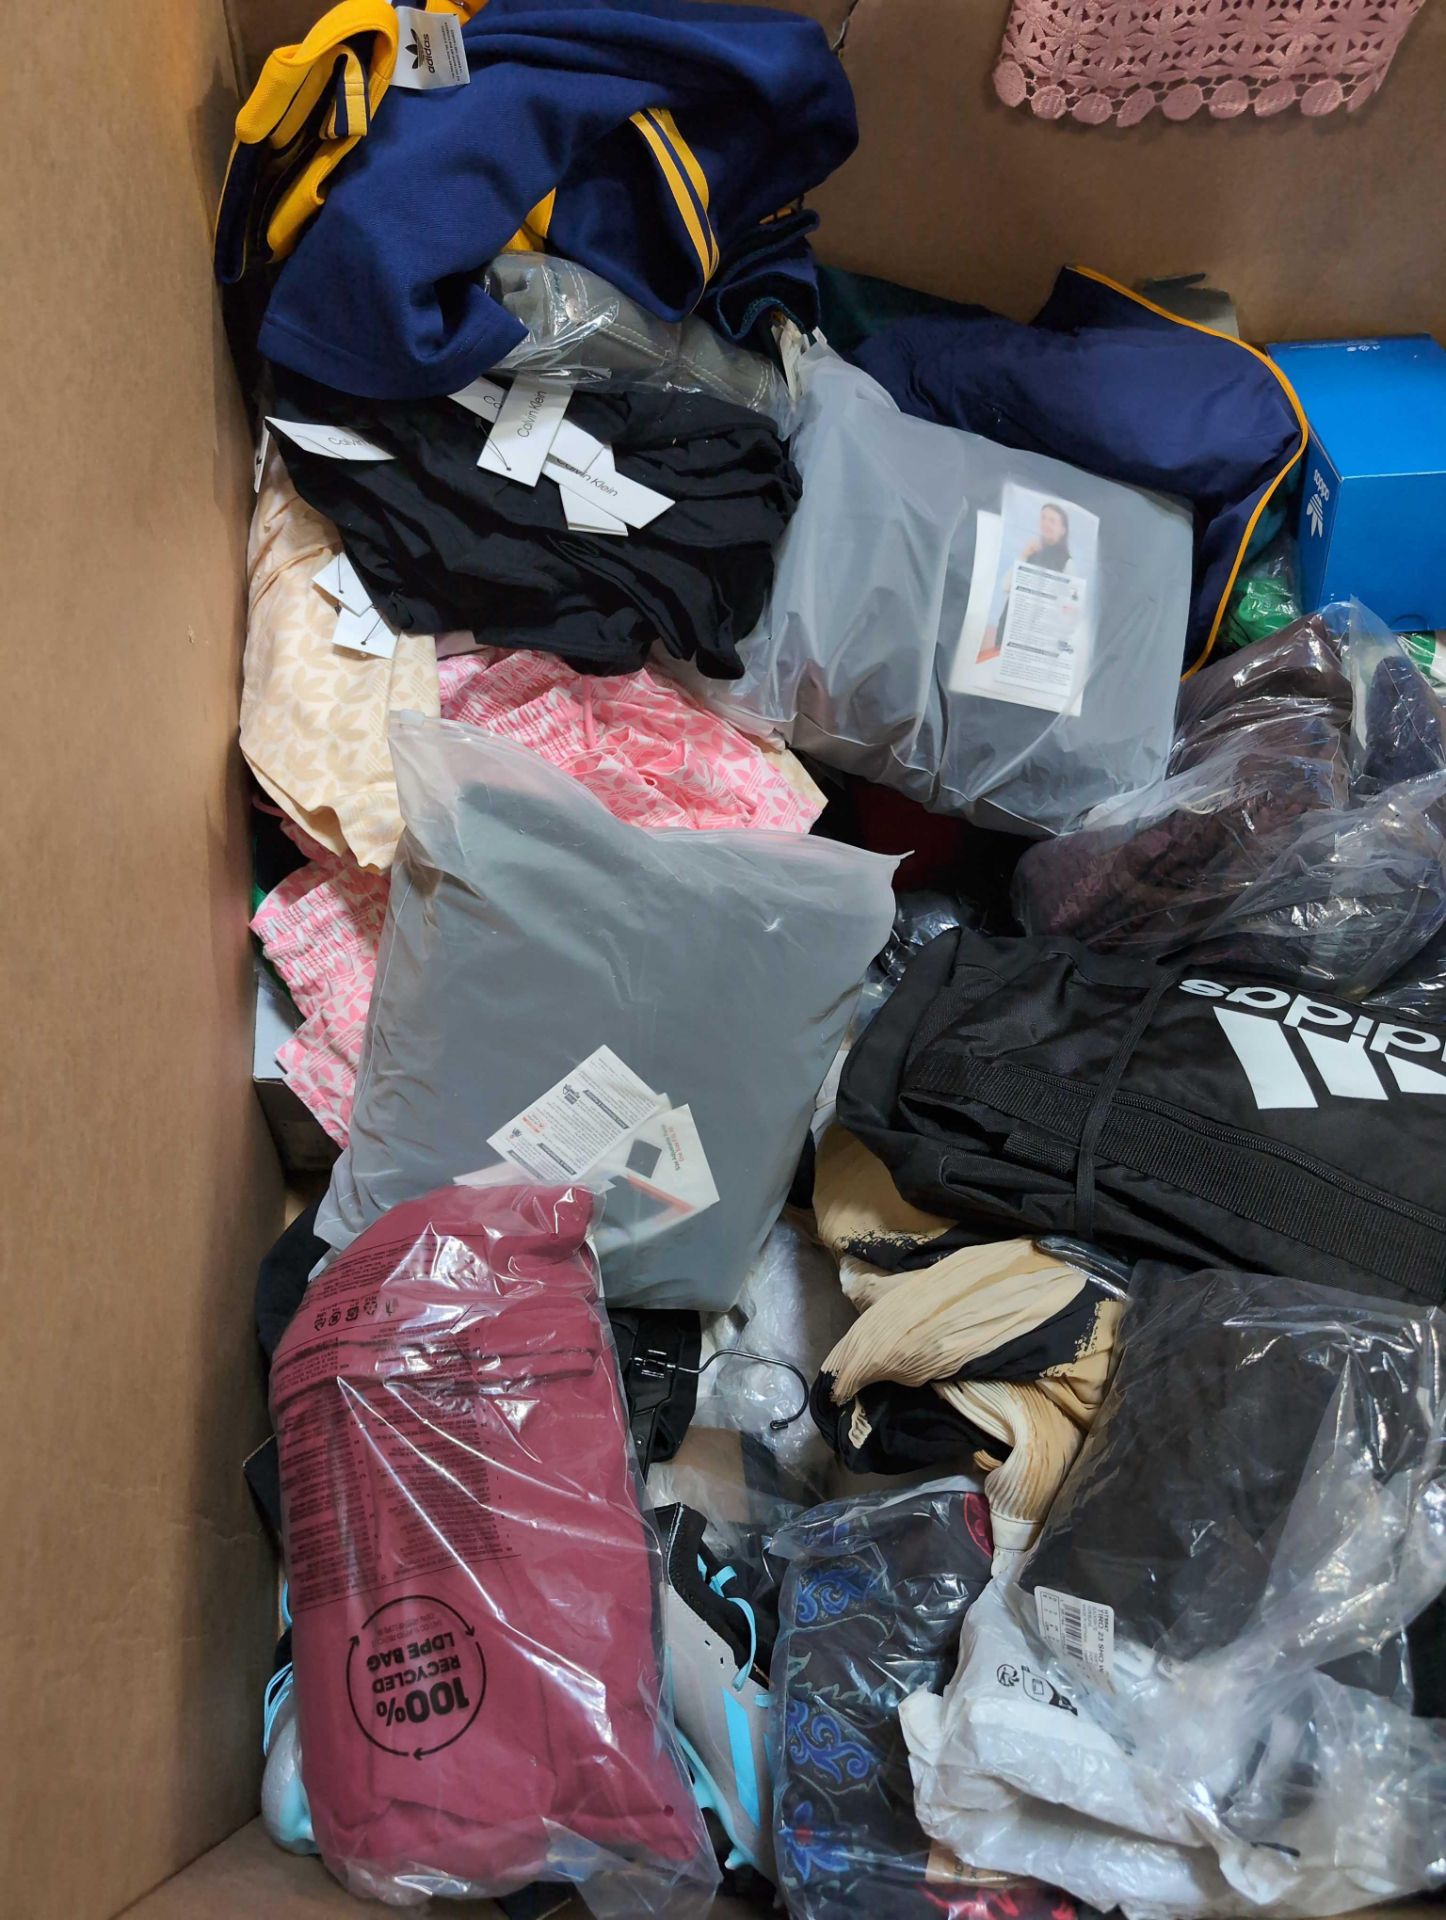 nicer clothing kith duffle bags, Yeezy Adidas Converse powder River, Calvin, Klein and more - Image 20 of 28